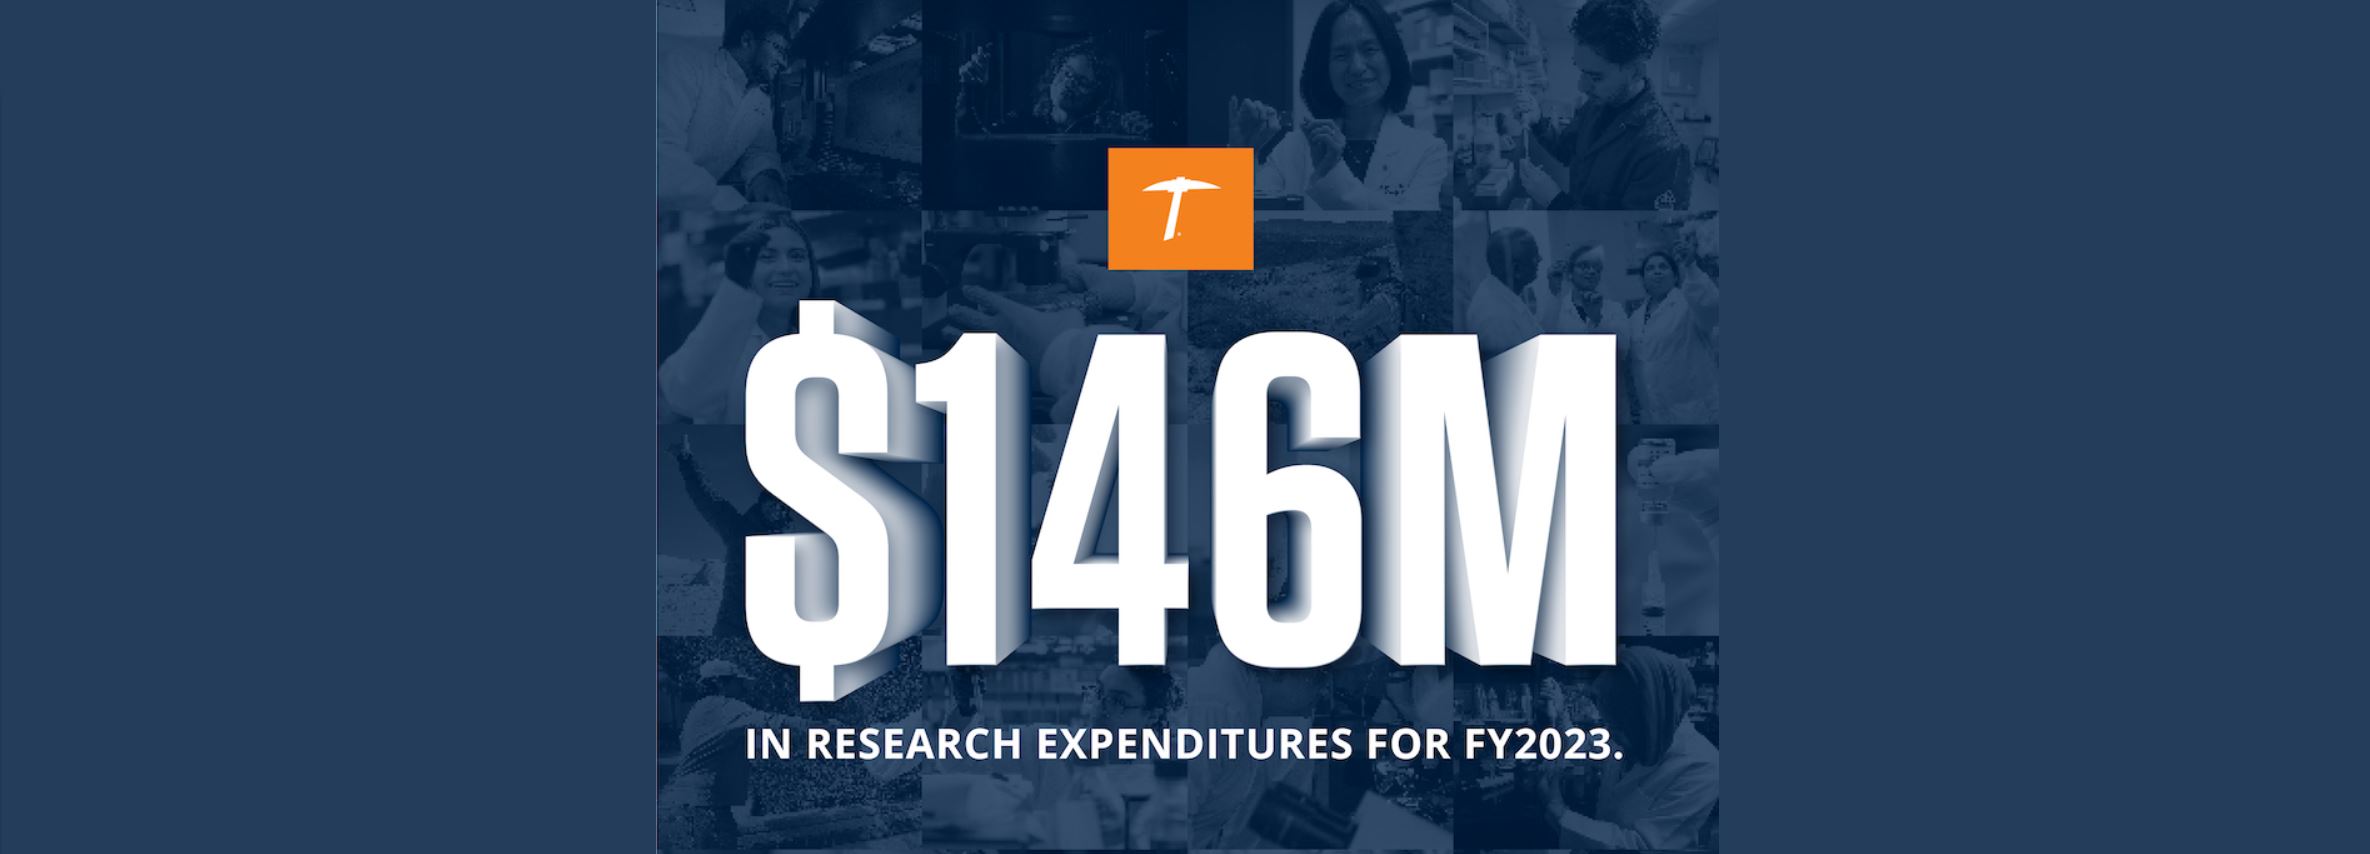 UTEP Breaks Research Expenditures Record! 